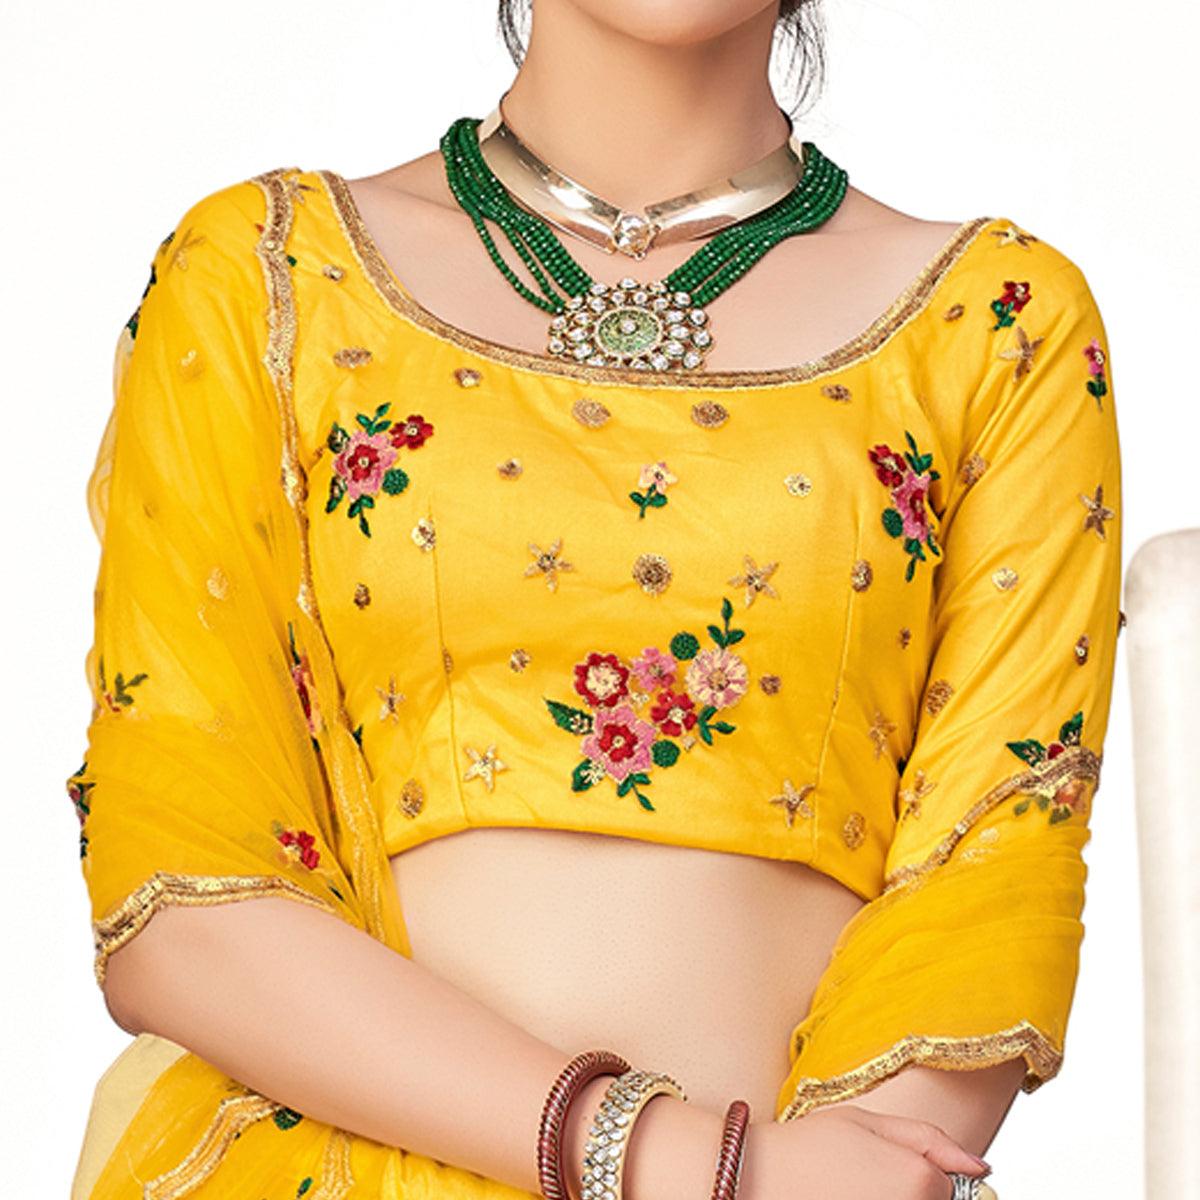 Yellow Festive Wear Thread With Floral Sequence Embroidered Net Lehenga Choli - Peachmode